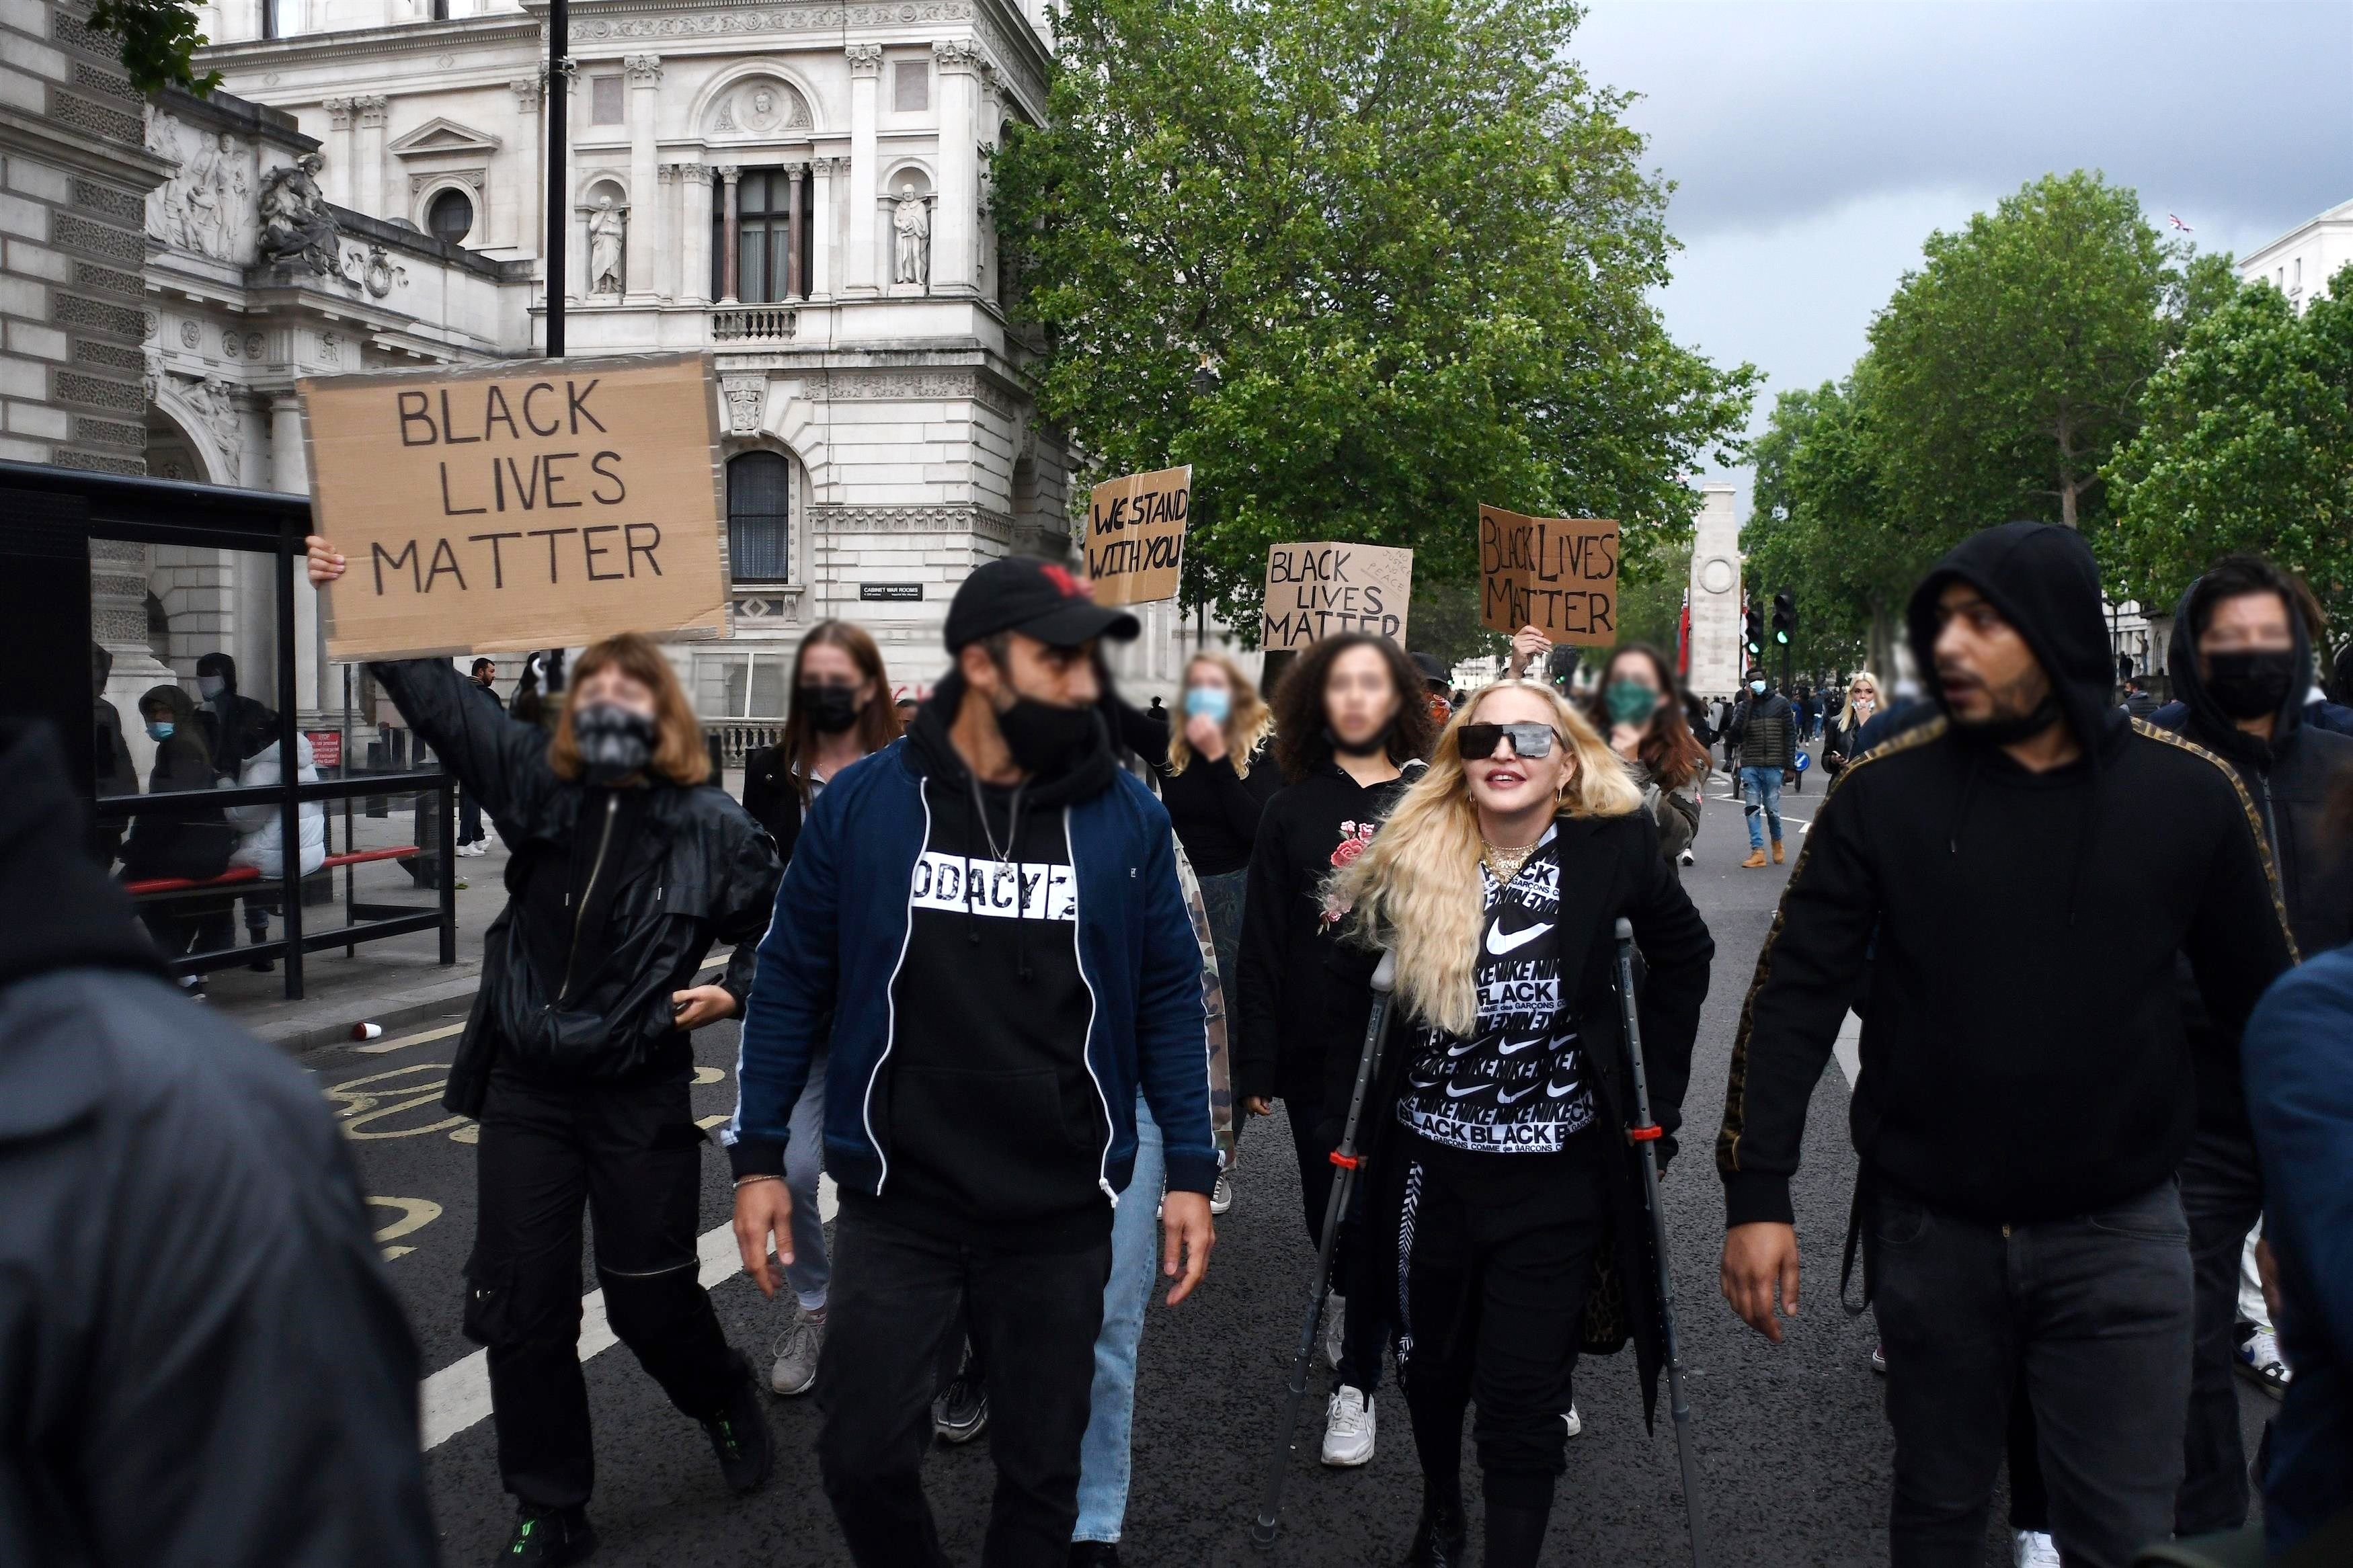 Madonna Uses Two Crutches At Black Lives Matter Protest London